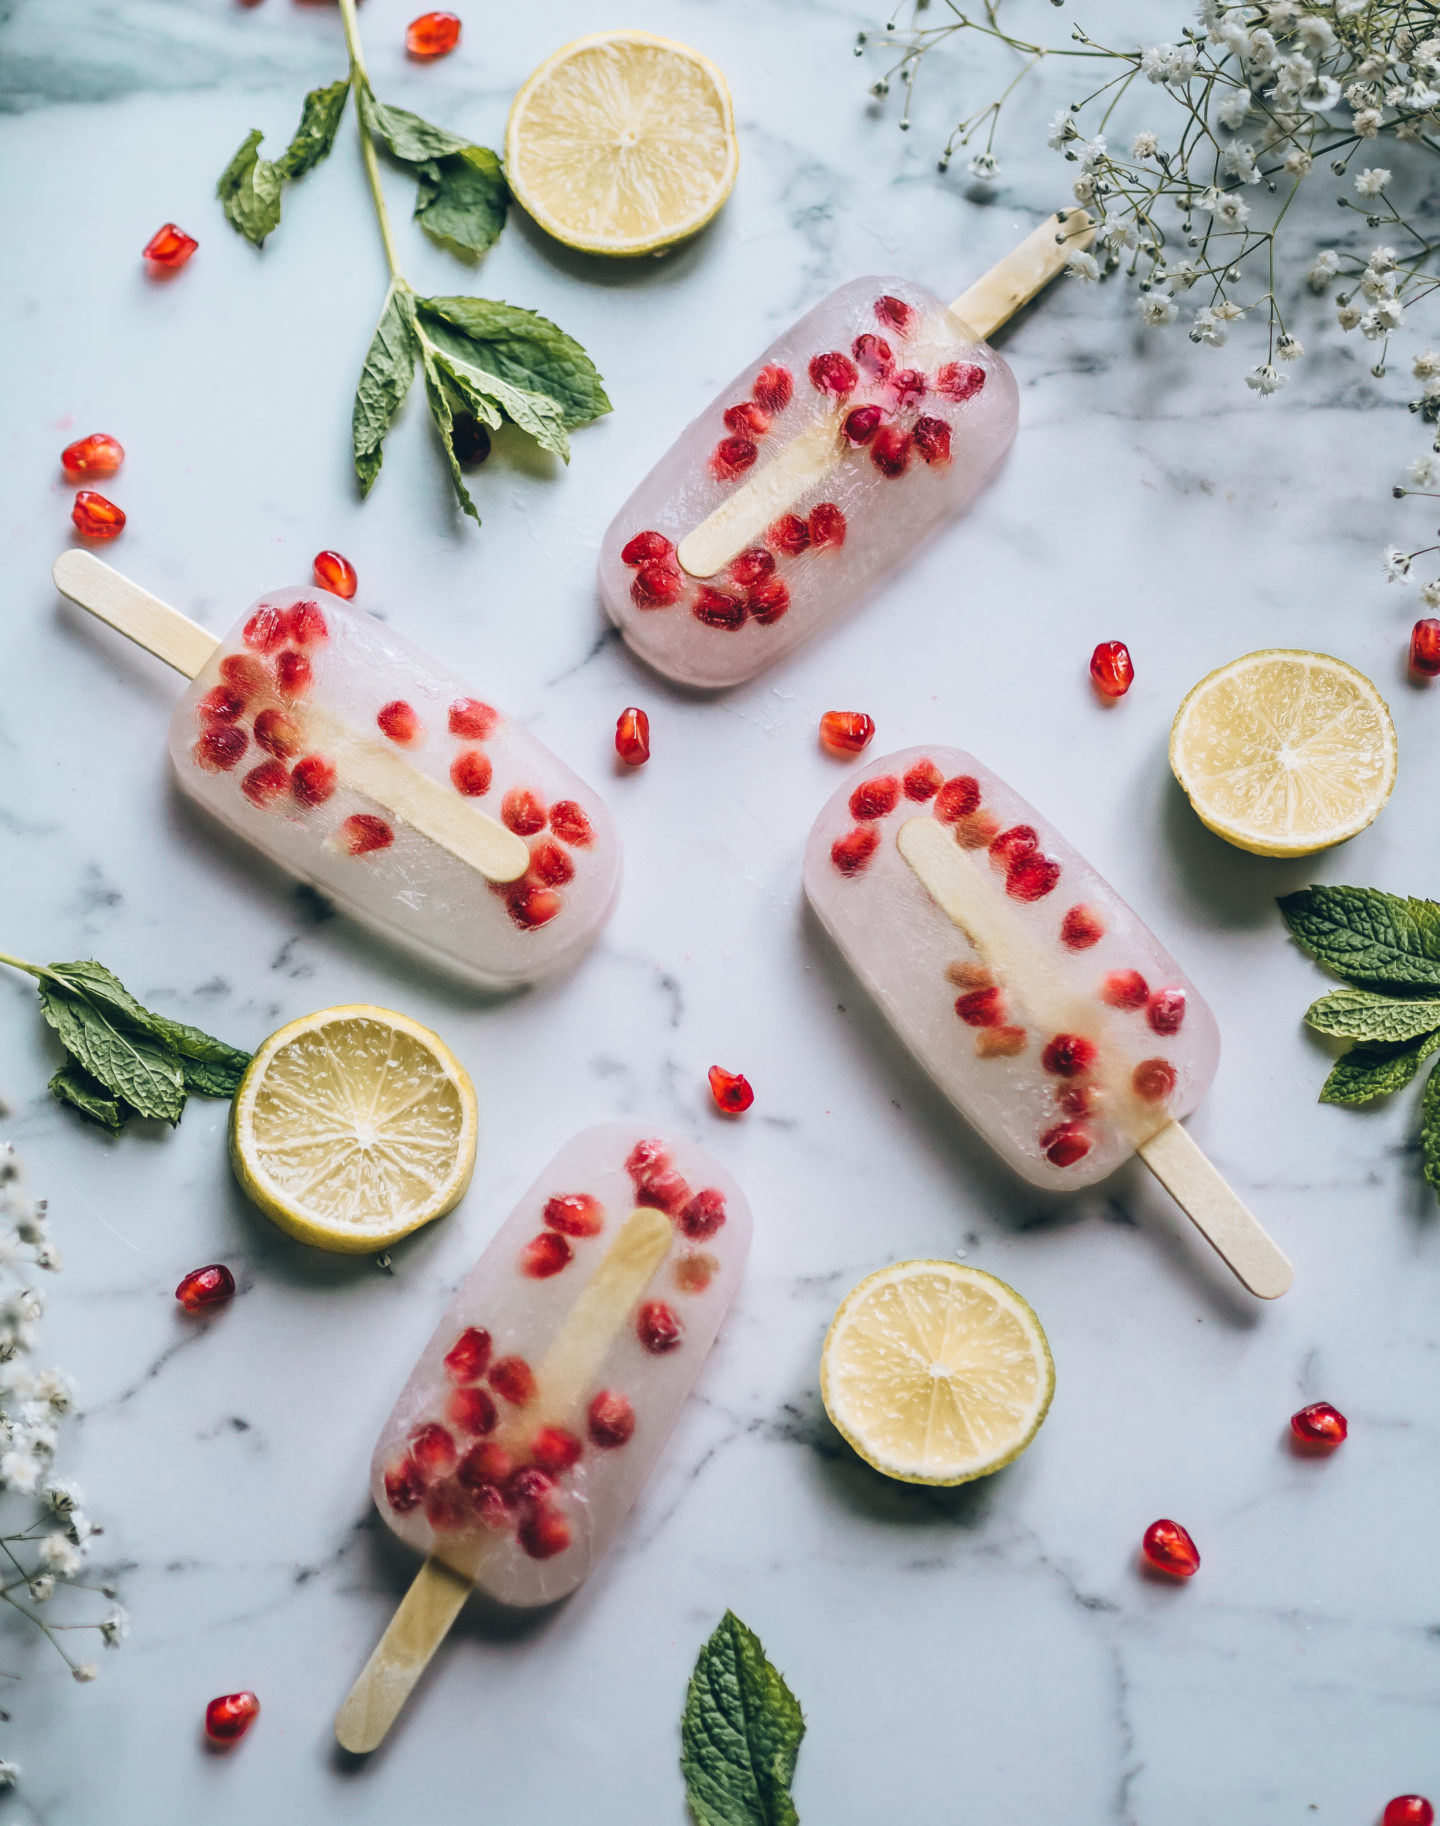 Make Your Own Low-Calorie Pomegranate Pops